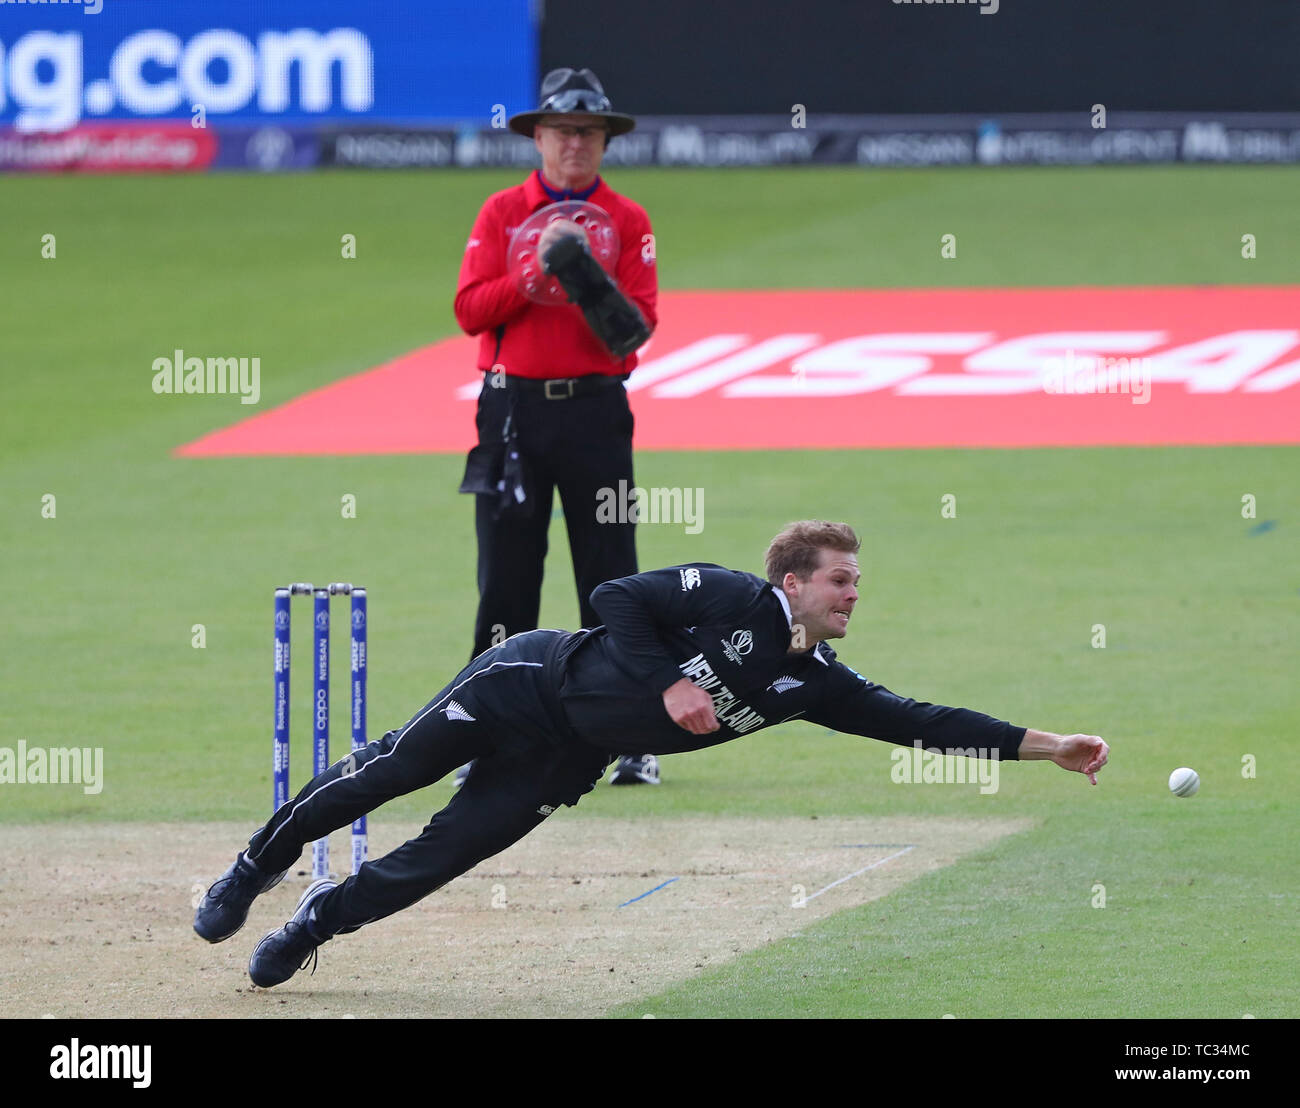 LONDON, ENGLAND. 05 JUNE 2019: Lockie Ferguson of New Zealand attempts to field the ball of his own bowling during the Bangladesh v New Zealand, ICC Cricket World Cup match, at the Kia Oval, London, England. Credit: European Sports Photographic Agency/Alamy Live News Stock Photo